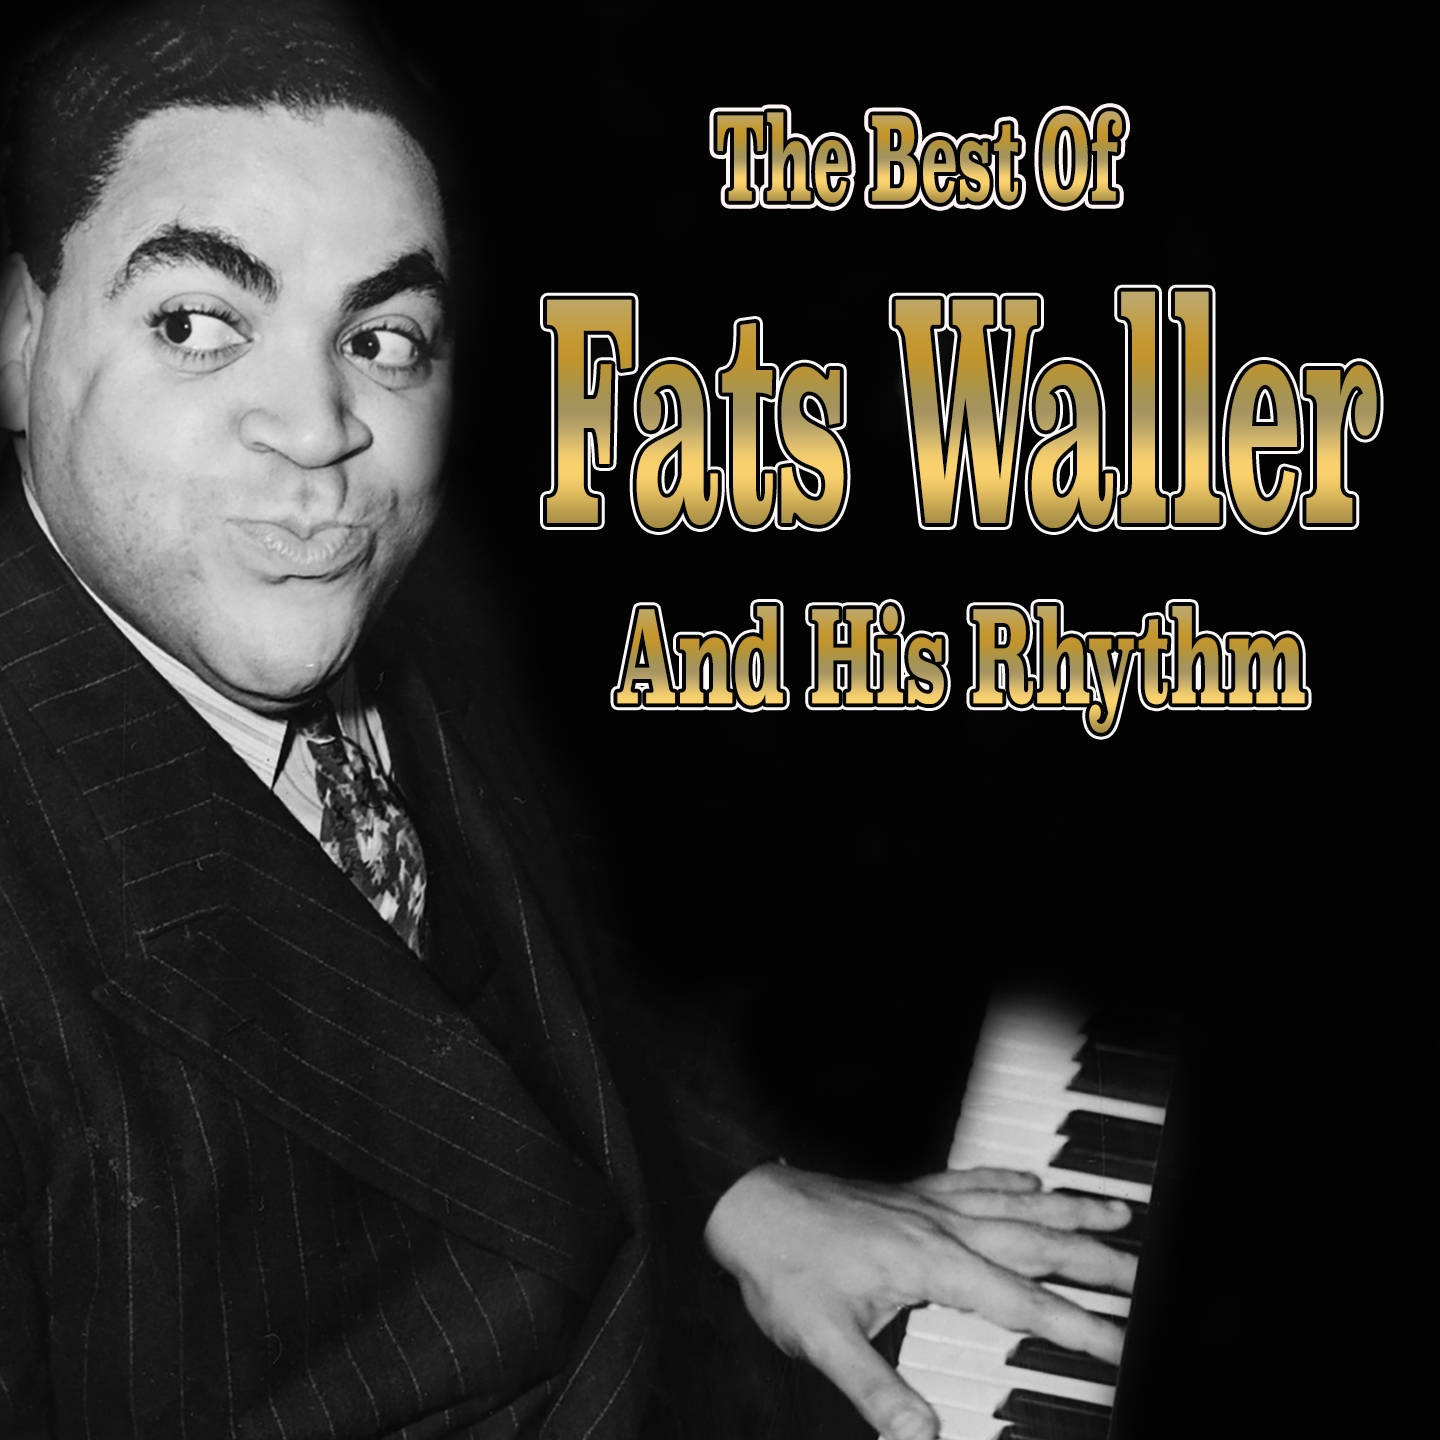 The Best Of Fats Waller And His Rhythm Wallpaper